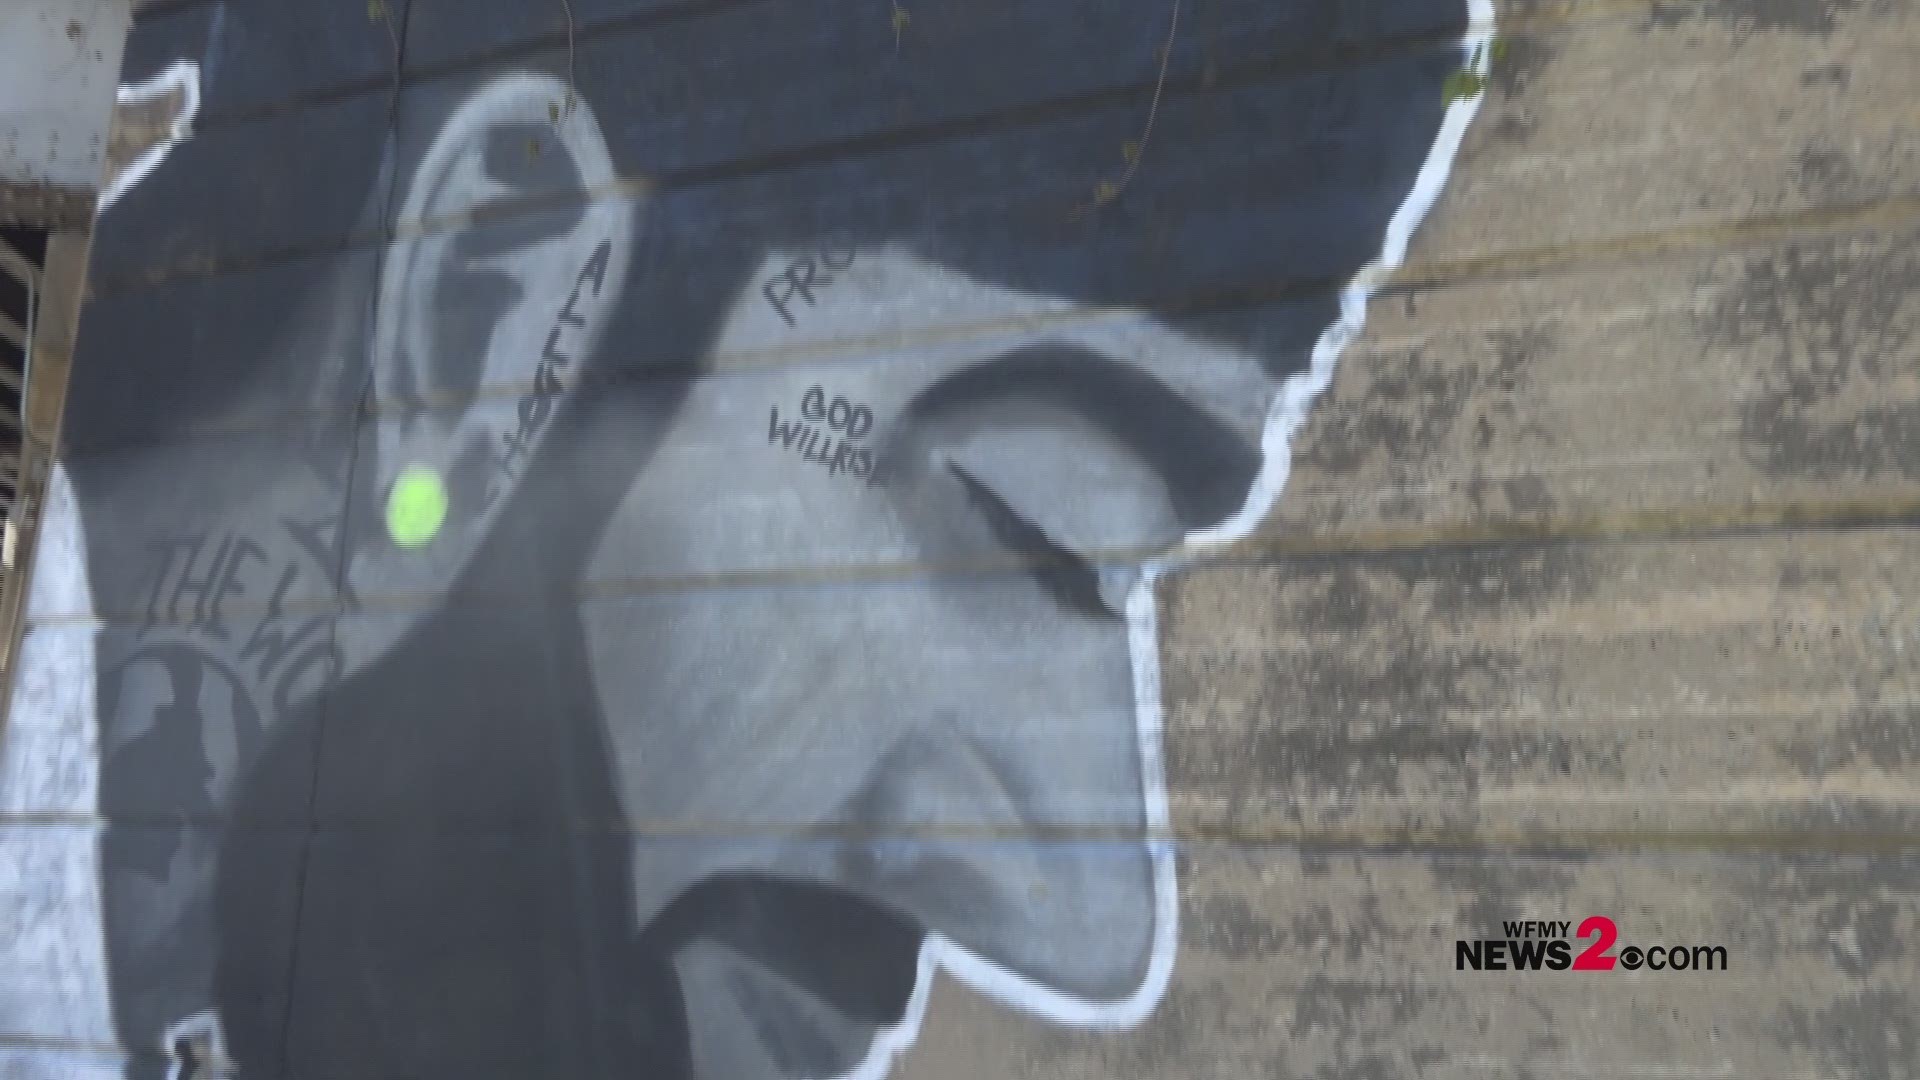 Nipsey Hussle was shot to death March 31 while standing outside his South Los Angeles clothing store, not far from where he grew up. In Greensboro, murals honor his memory.